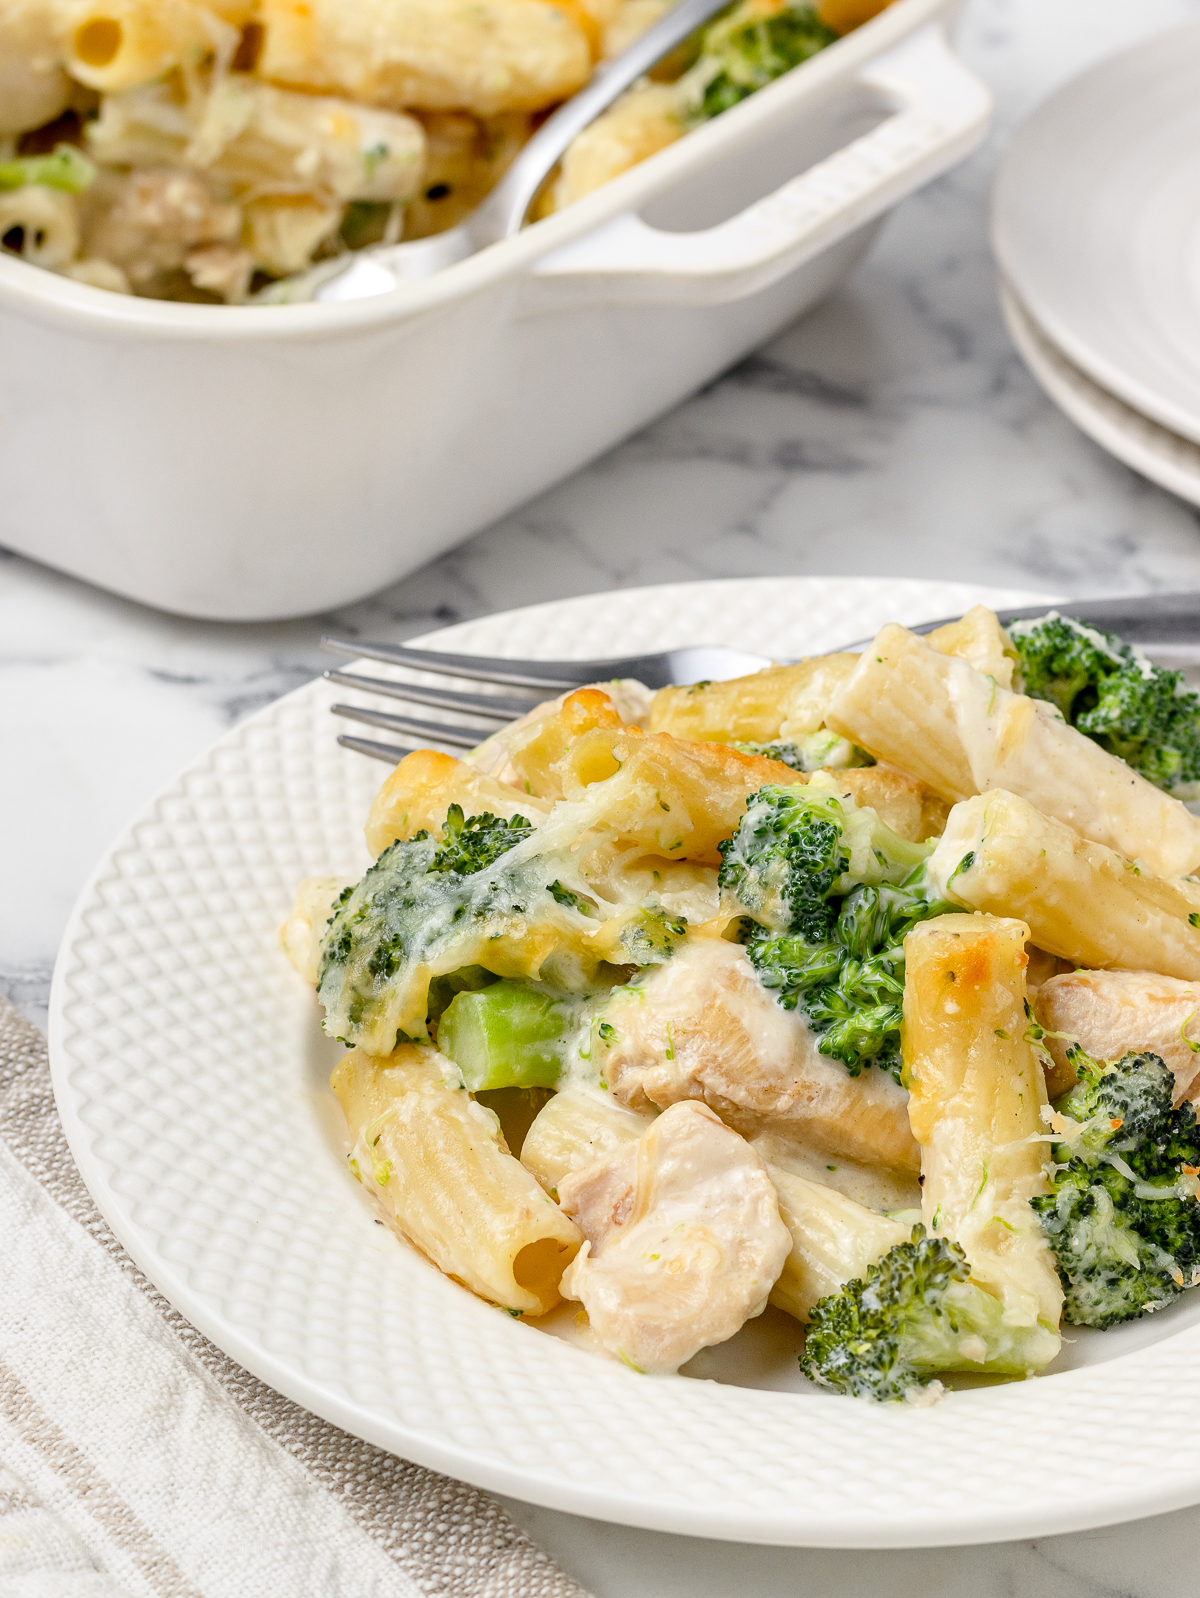 Baked Chicken and Broccoli Pasta on a plate with a fork ready to eat.